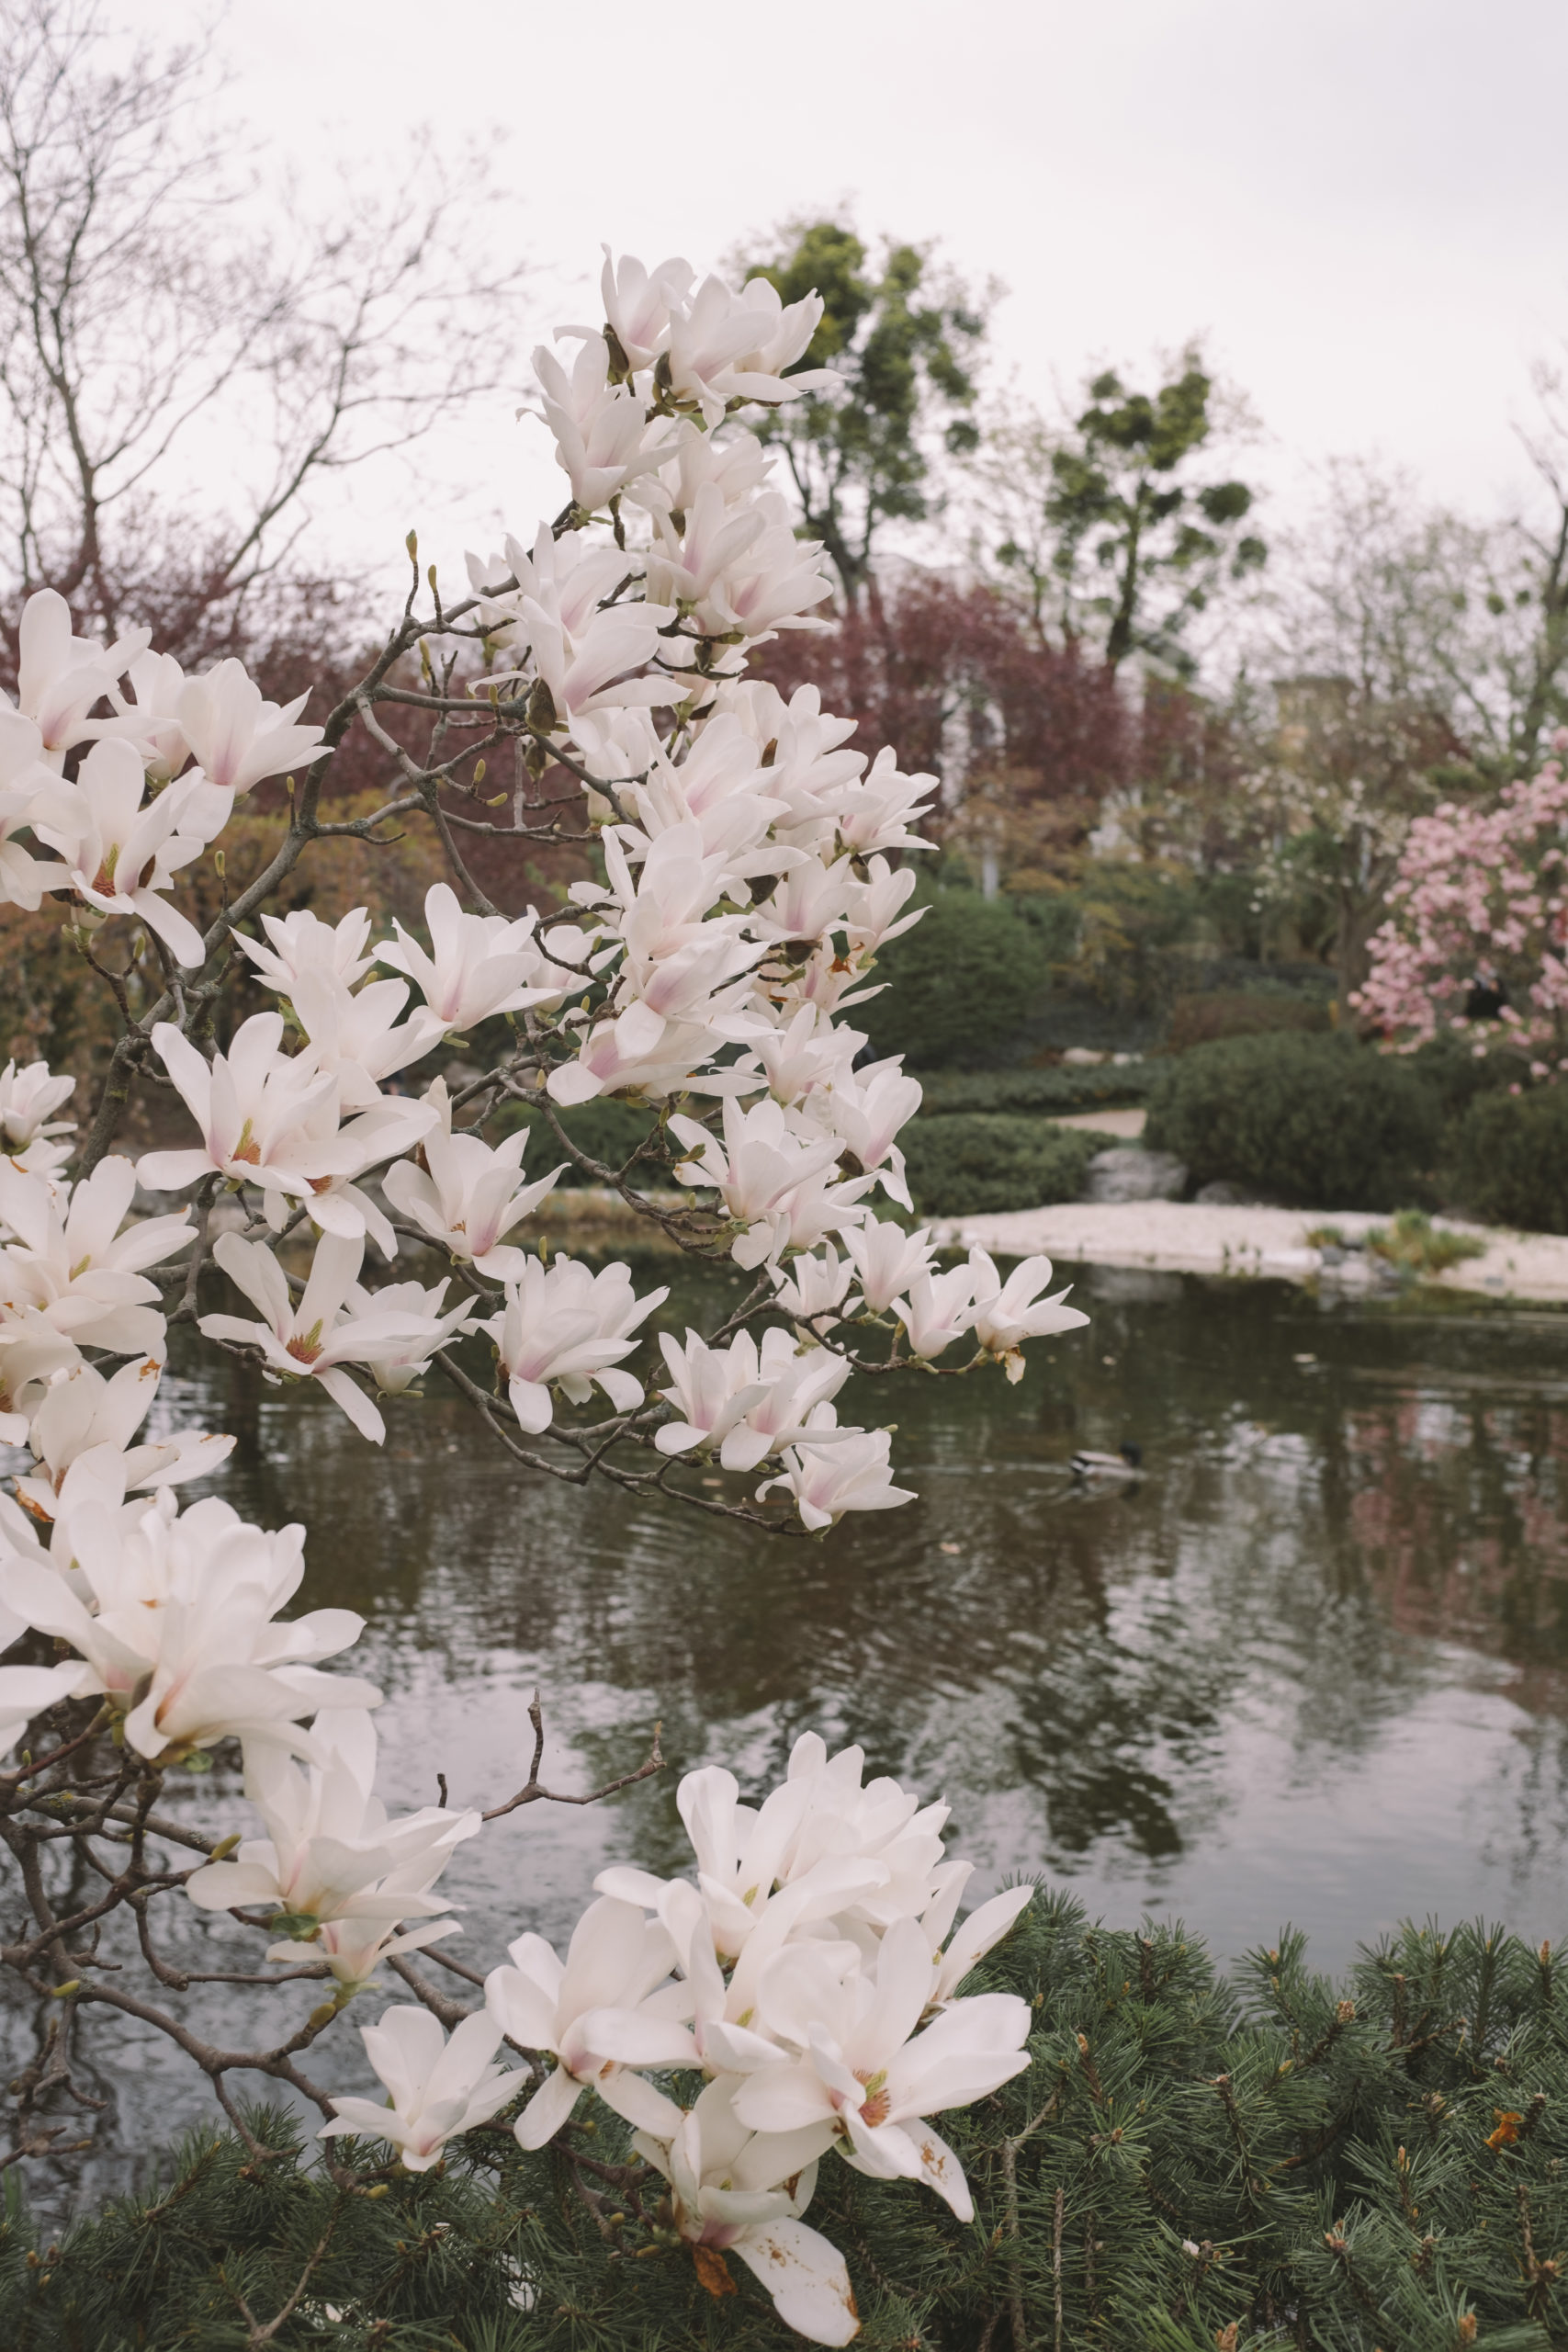 Japanese garden with a fish pond & cherry blossoms in Vienna